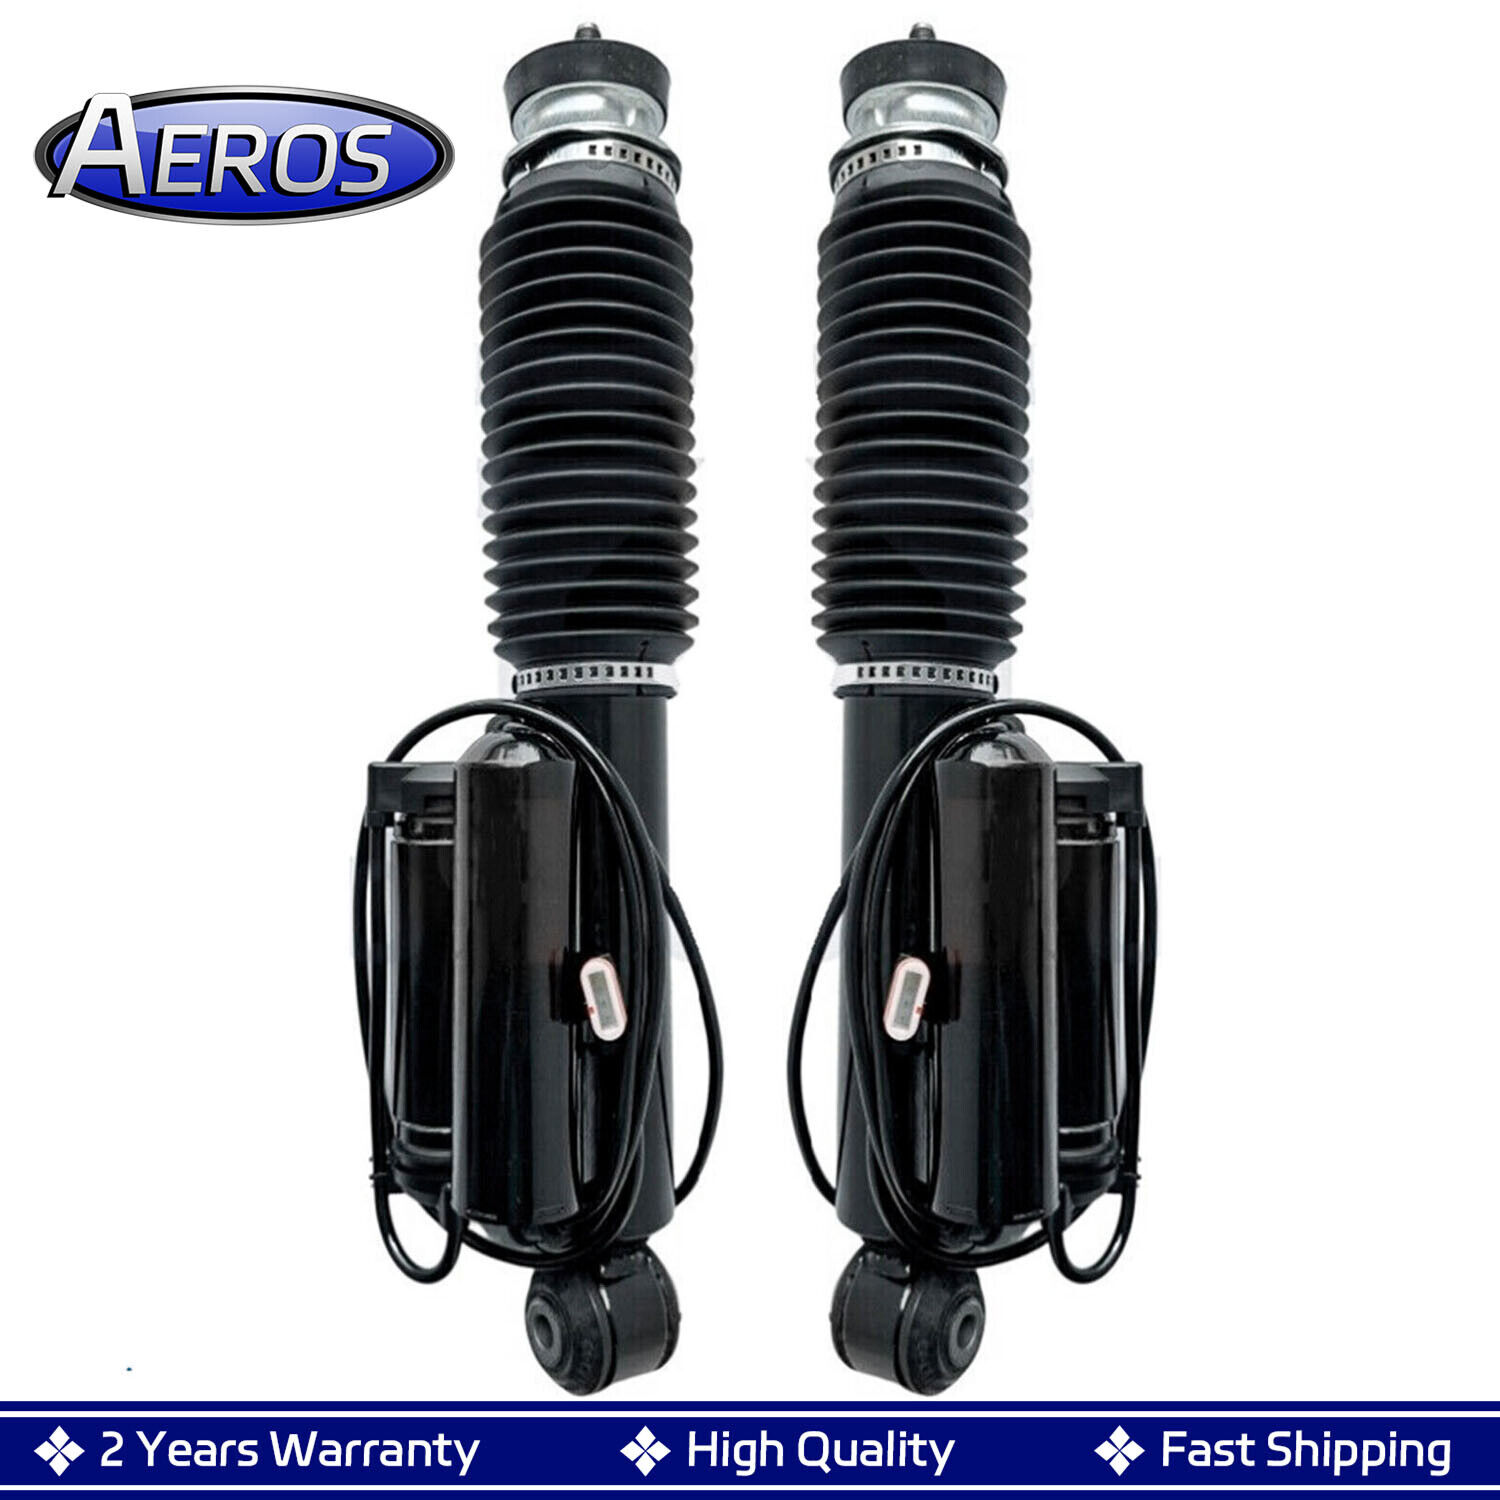 2X Rear Shock Absorbers w/ADS Fit Mercedes Benz S211 E320 E500 E63 AMG 2004-2009